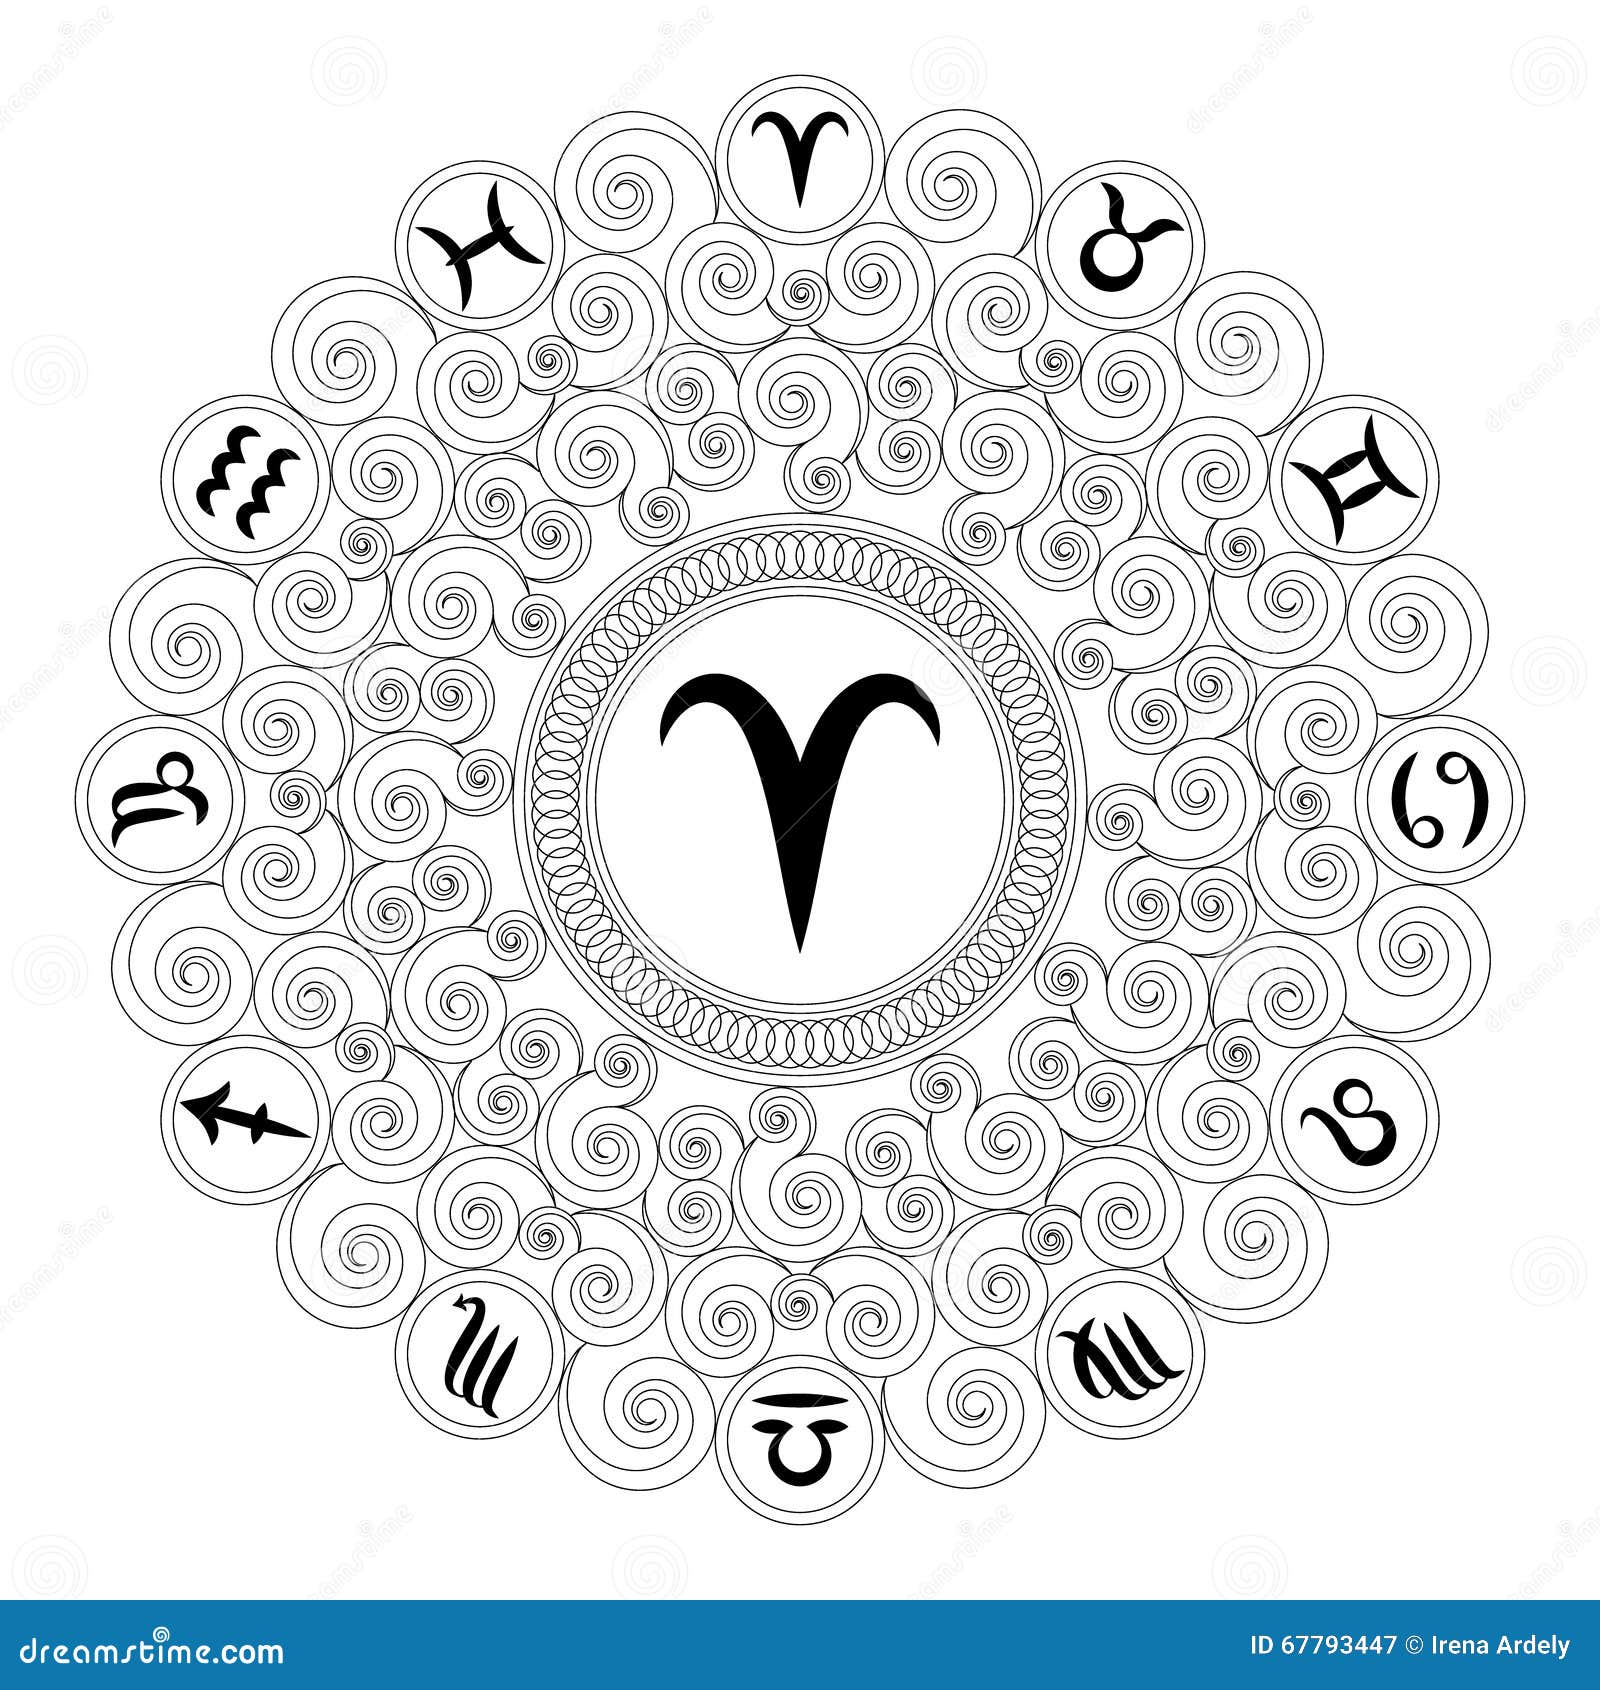 Download Black And White Round Mandala With Zodiac Symbol Of Aries - Adult Coloring Book Stock Vector ...